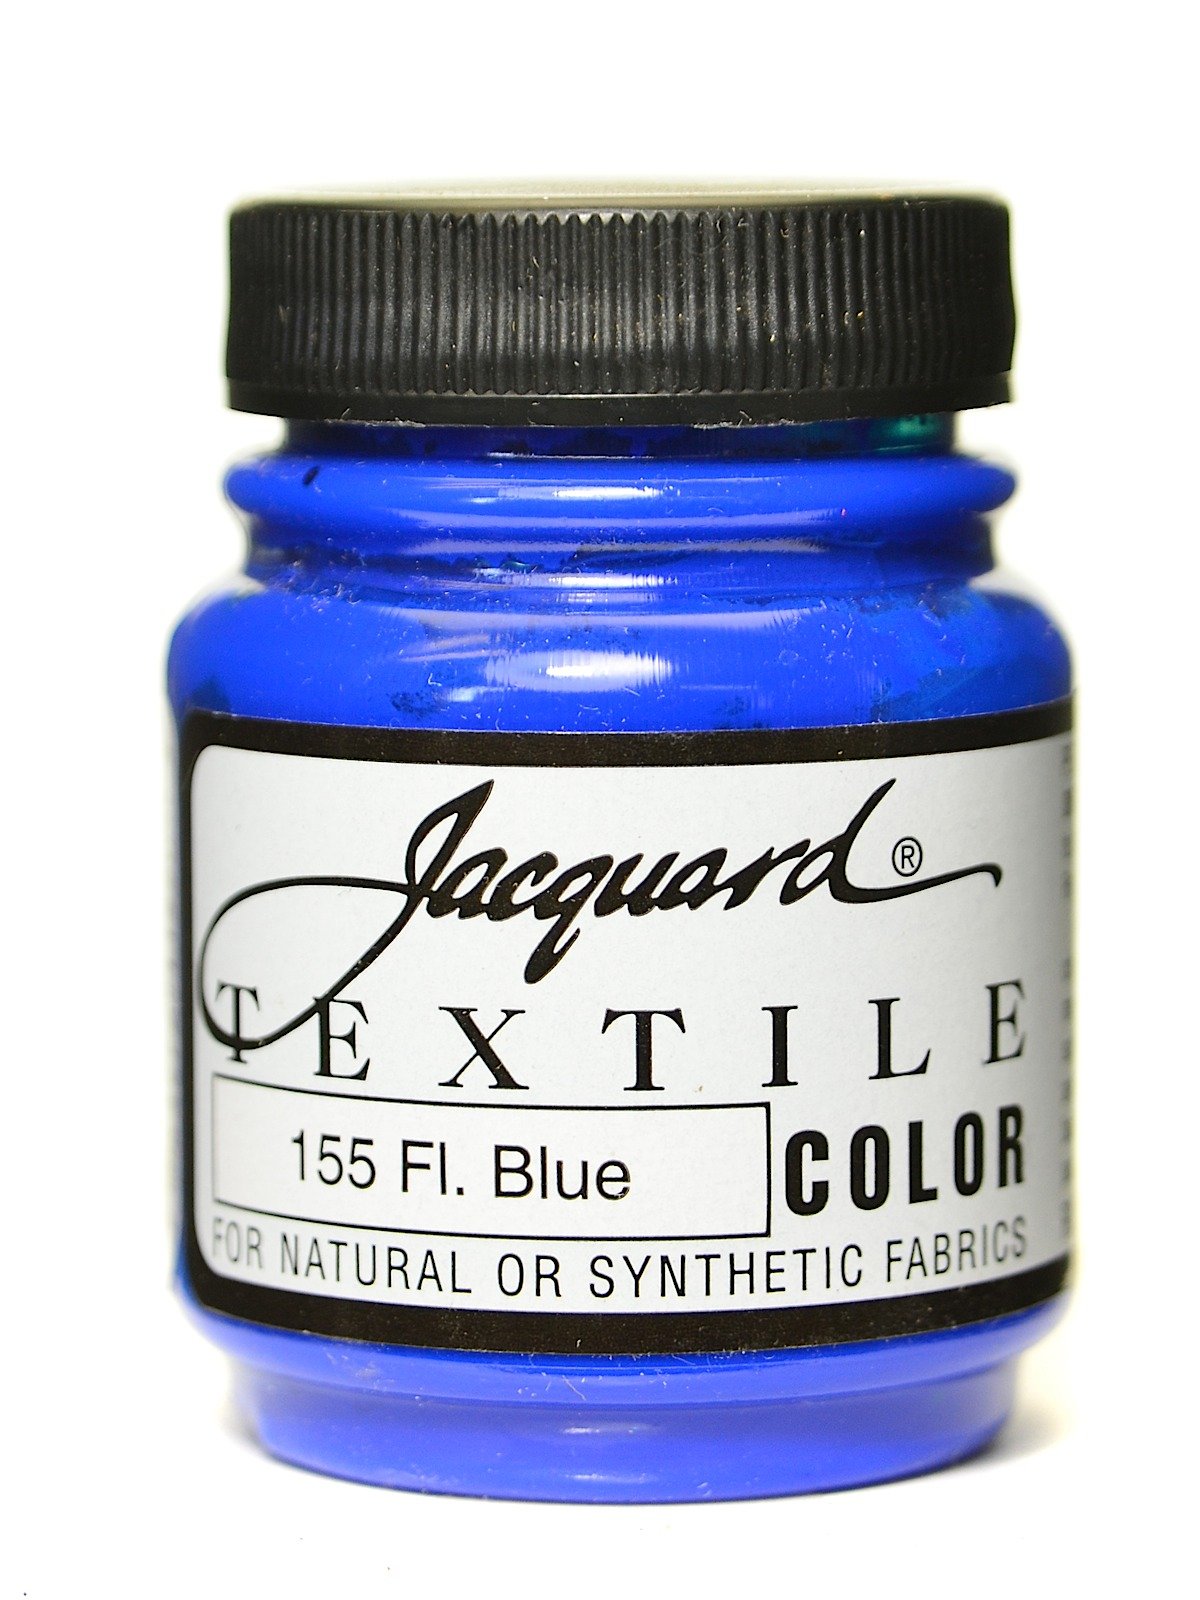 Jacquard Fabric Paint for Clothes - 8 Oz Textile Color - Periwinkle -  Leaves Fabric Soft - Permanent and Colorfast - Professional Quality Paints  Made